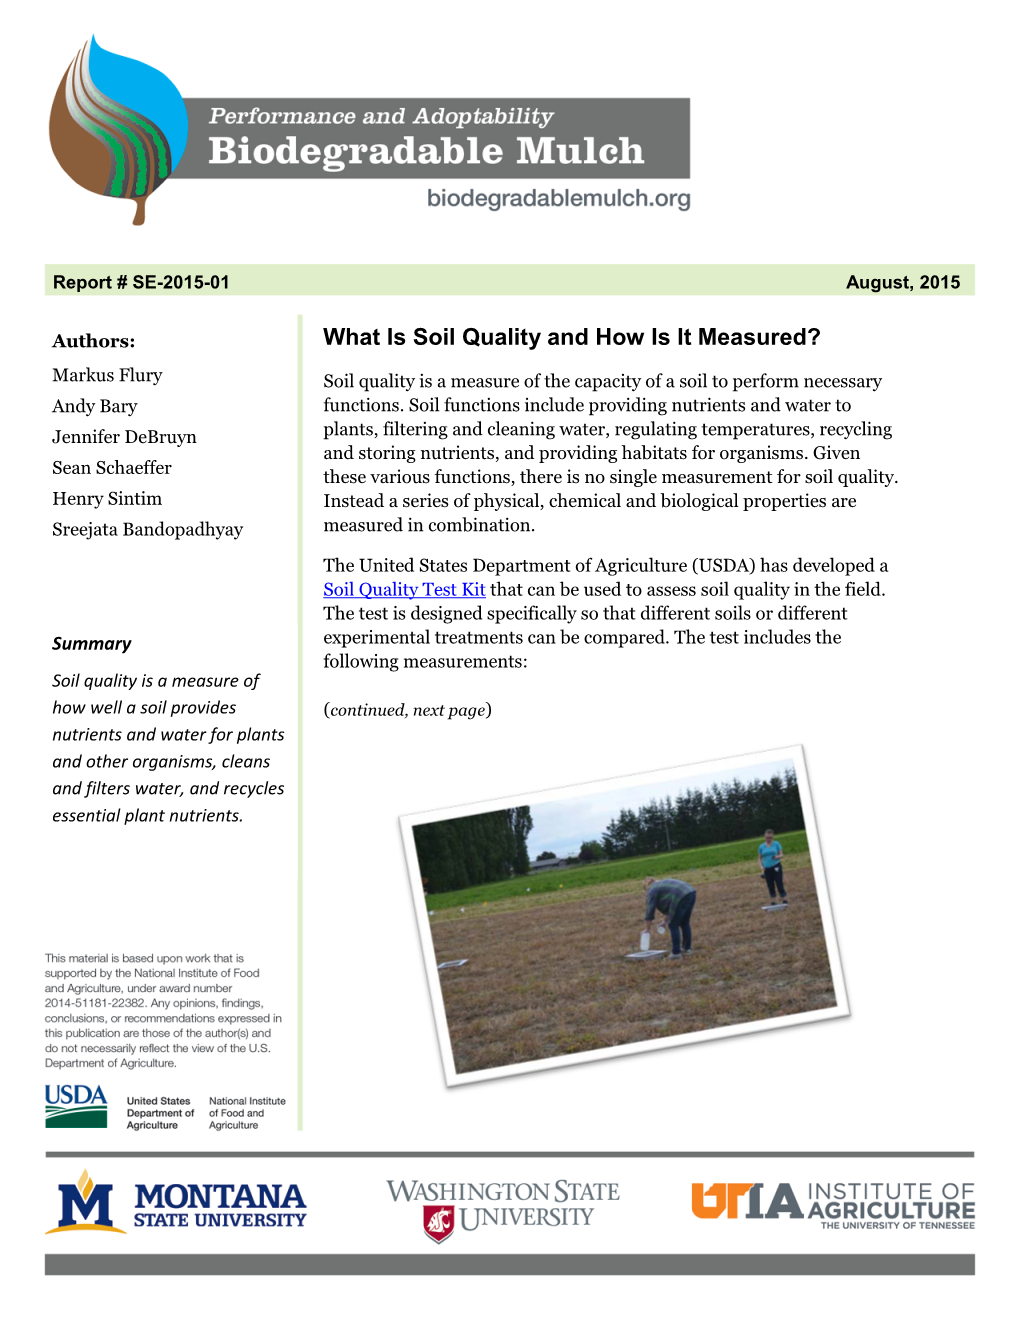 What Is Soil Quality and How Is It Measured?